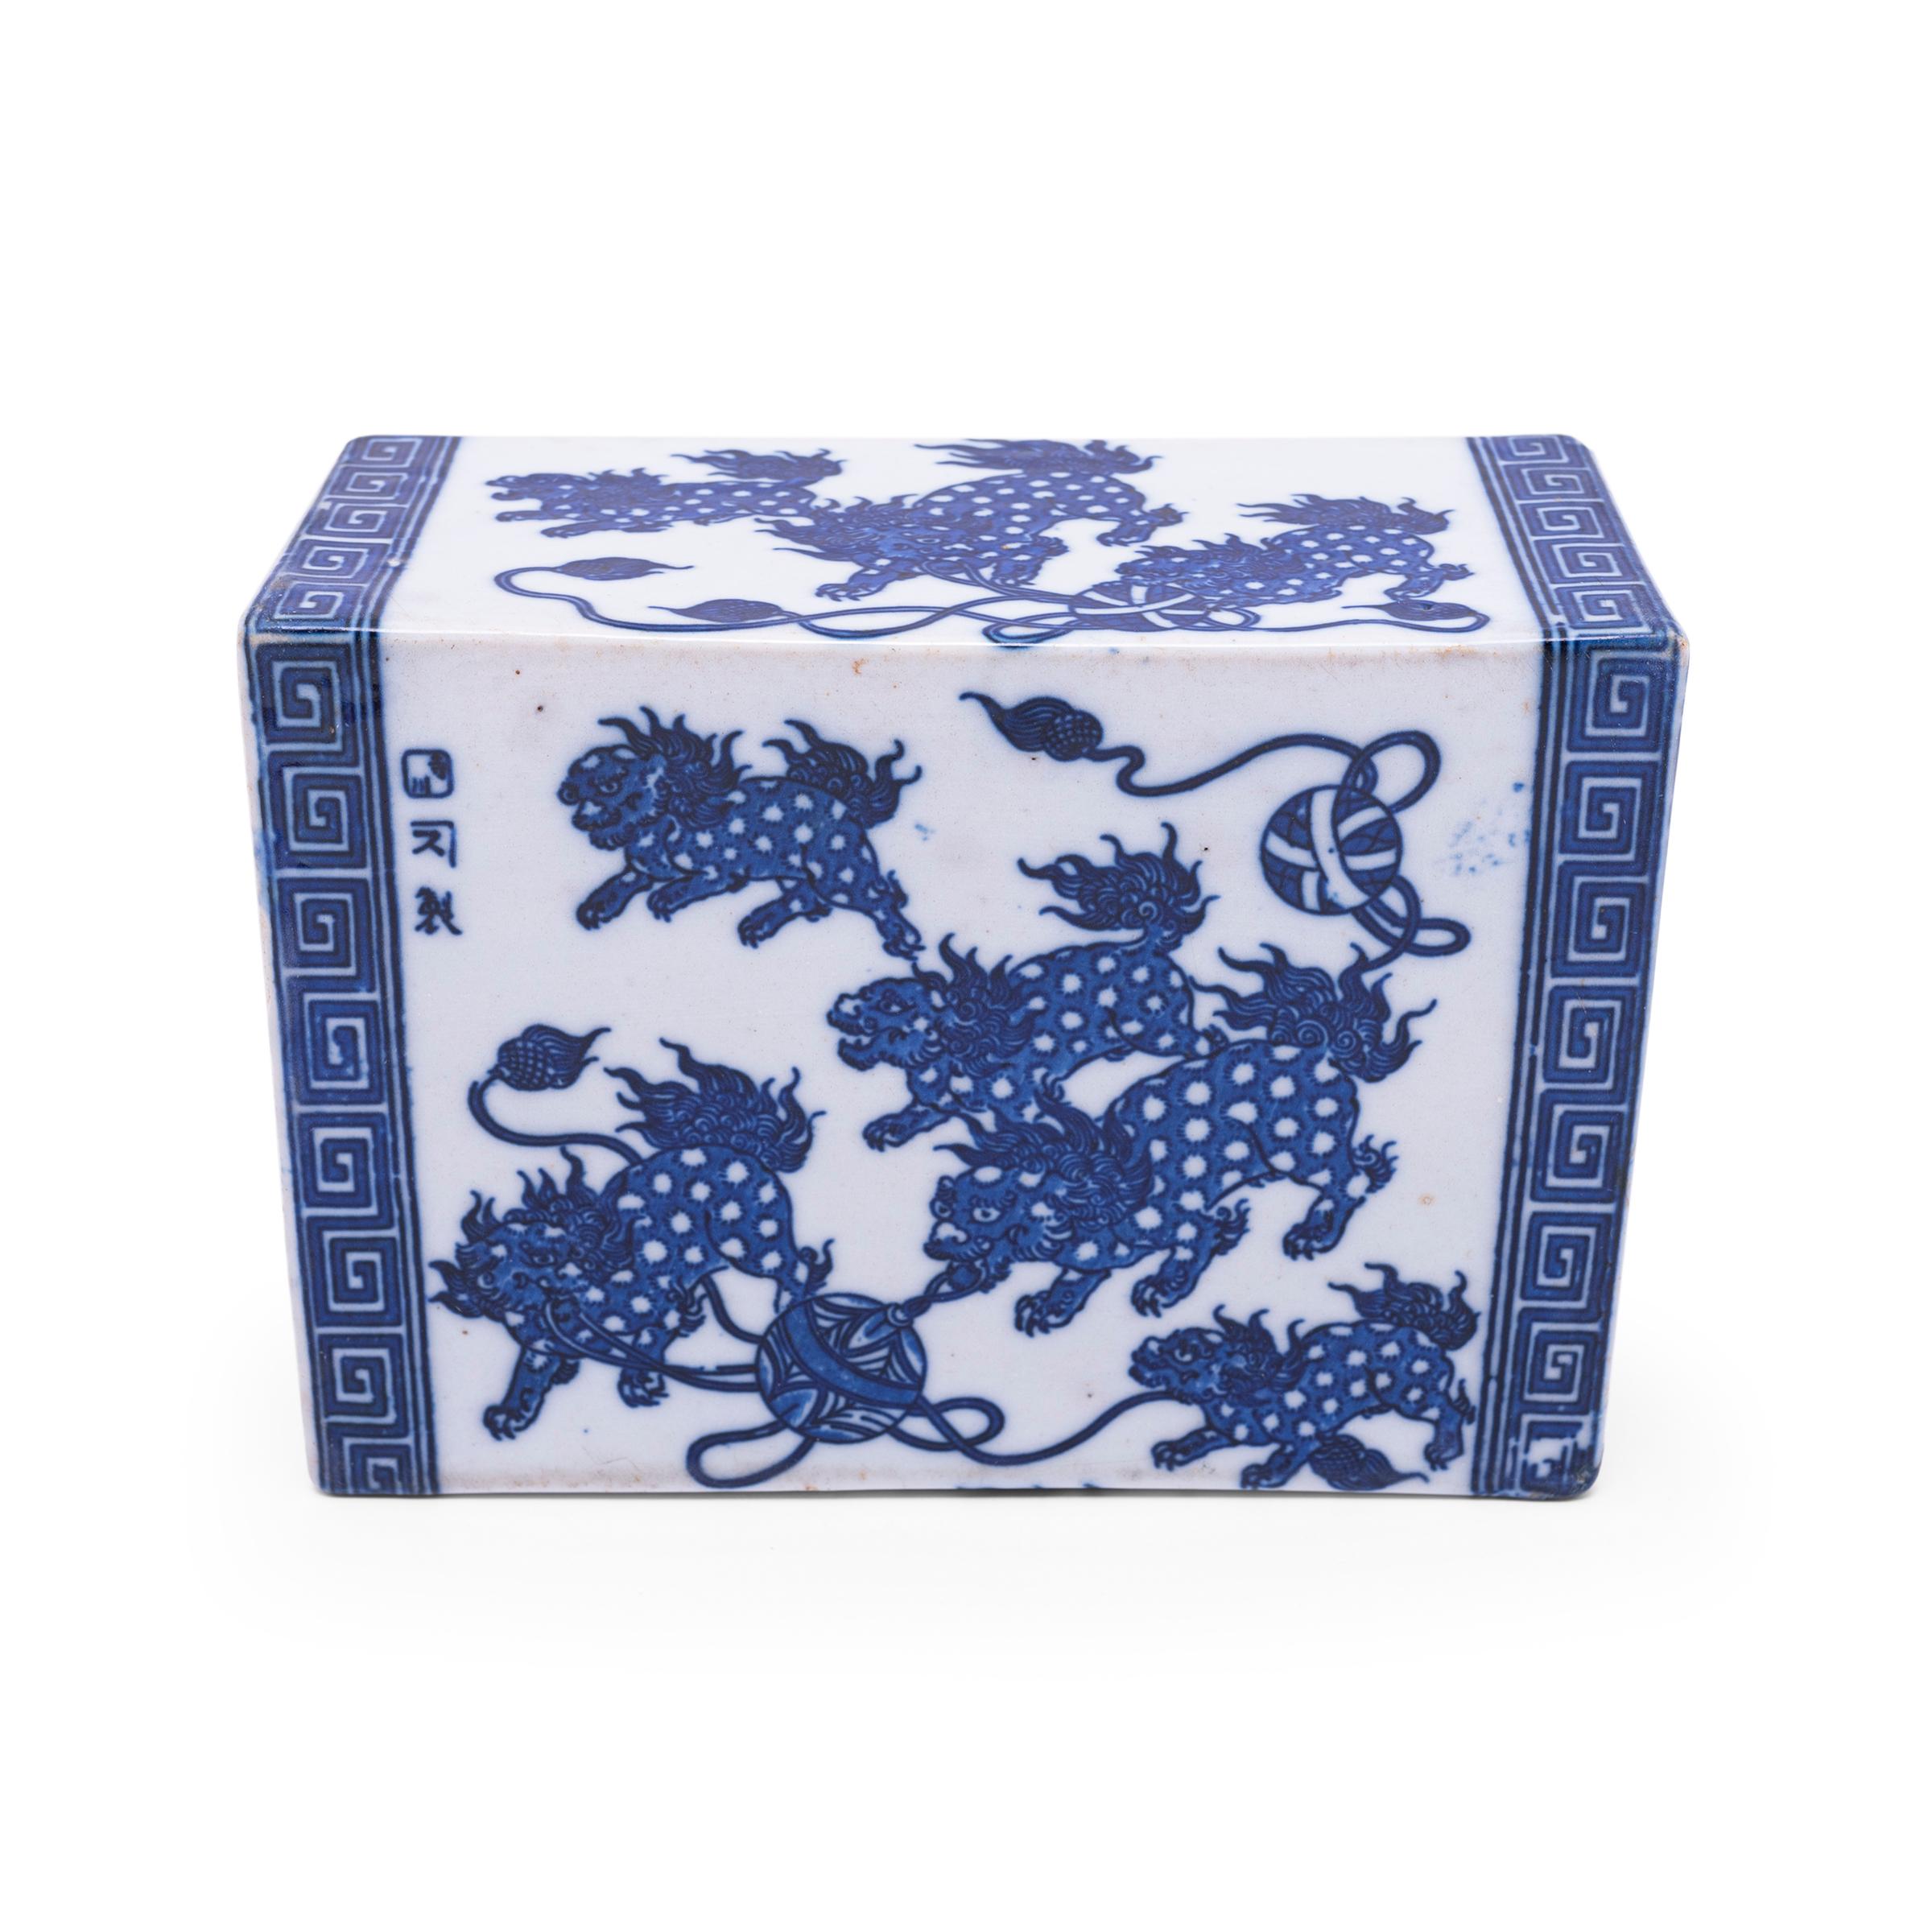 This rectangular ceramic block is actually a form of Chinese headrest or neck pillow. Popular during the Qing dynasty, rigid headrests such as this were used by upper-class women to protect their elaborate hairstyles by elevating the head during